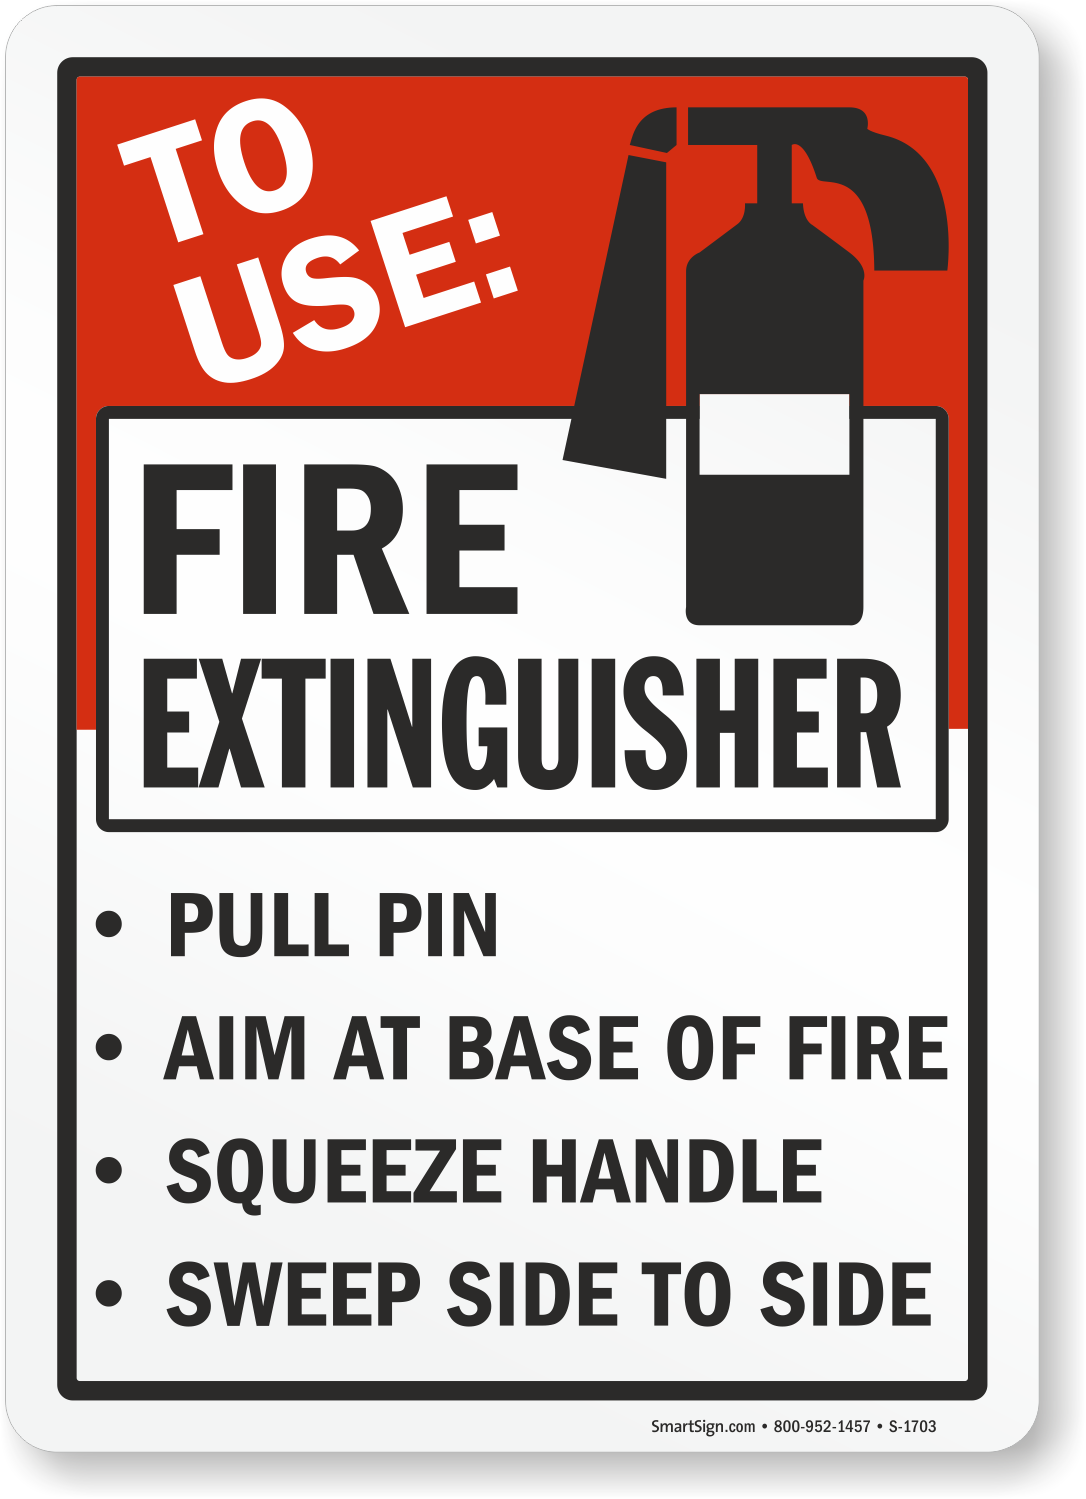 To Use Fire Extinguisher Pull Pin, Aim At Base Of Fire Sign